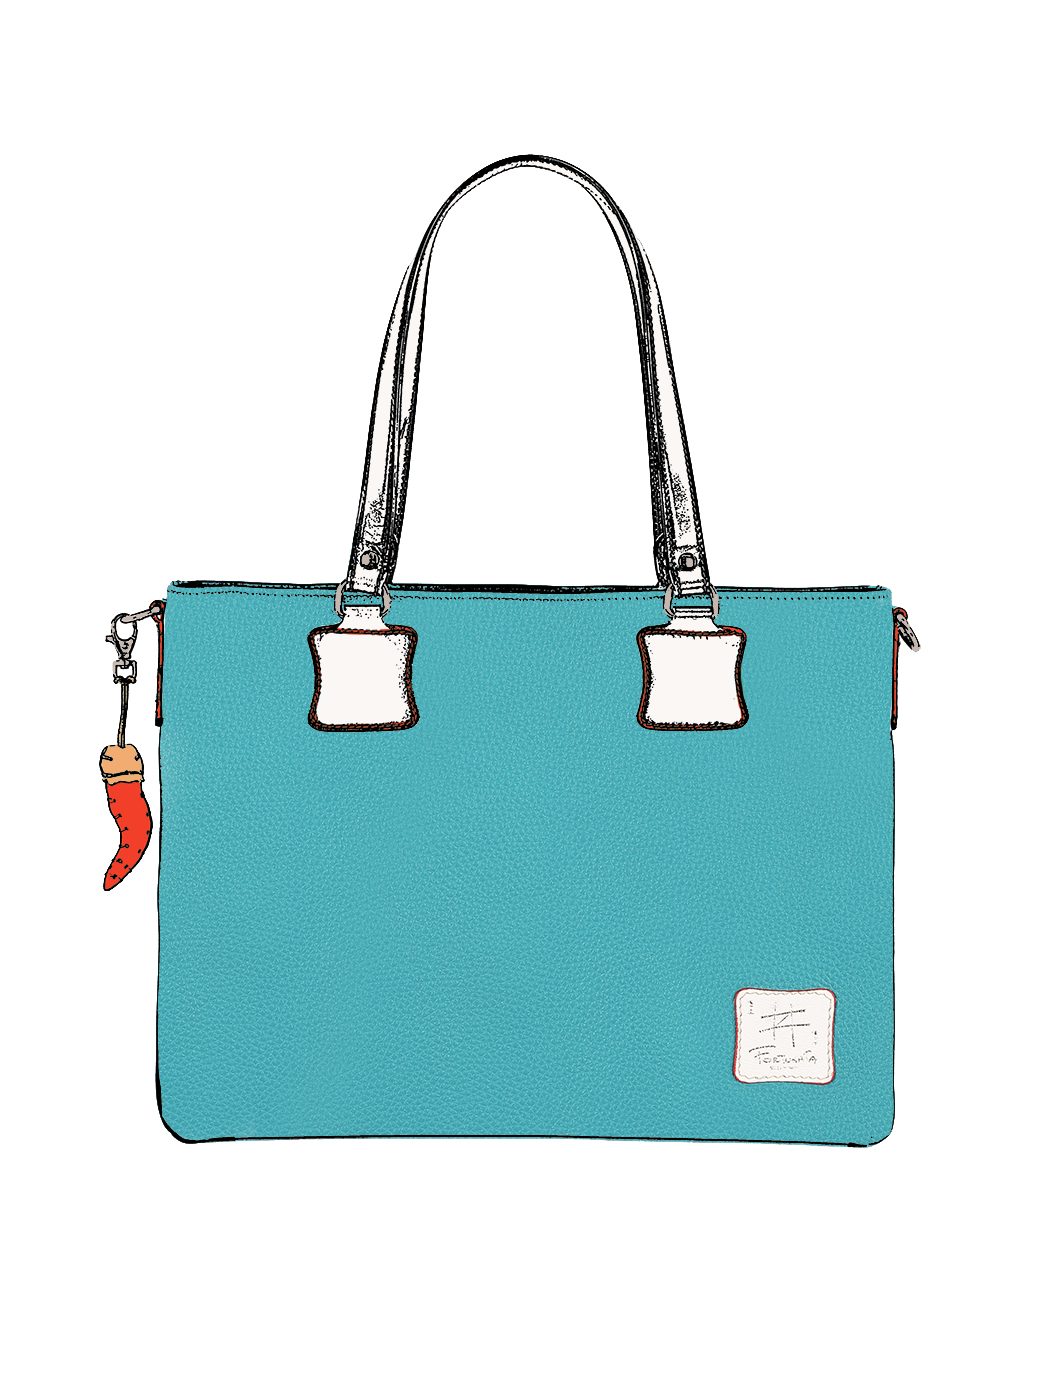 Shoulder Tote Bag Leather Light Blue - Handmade in Italy